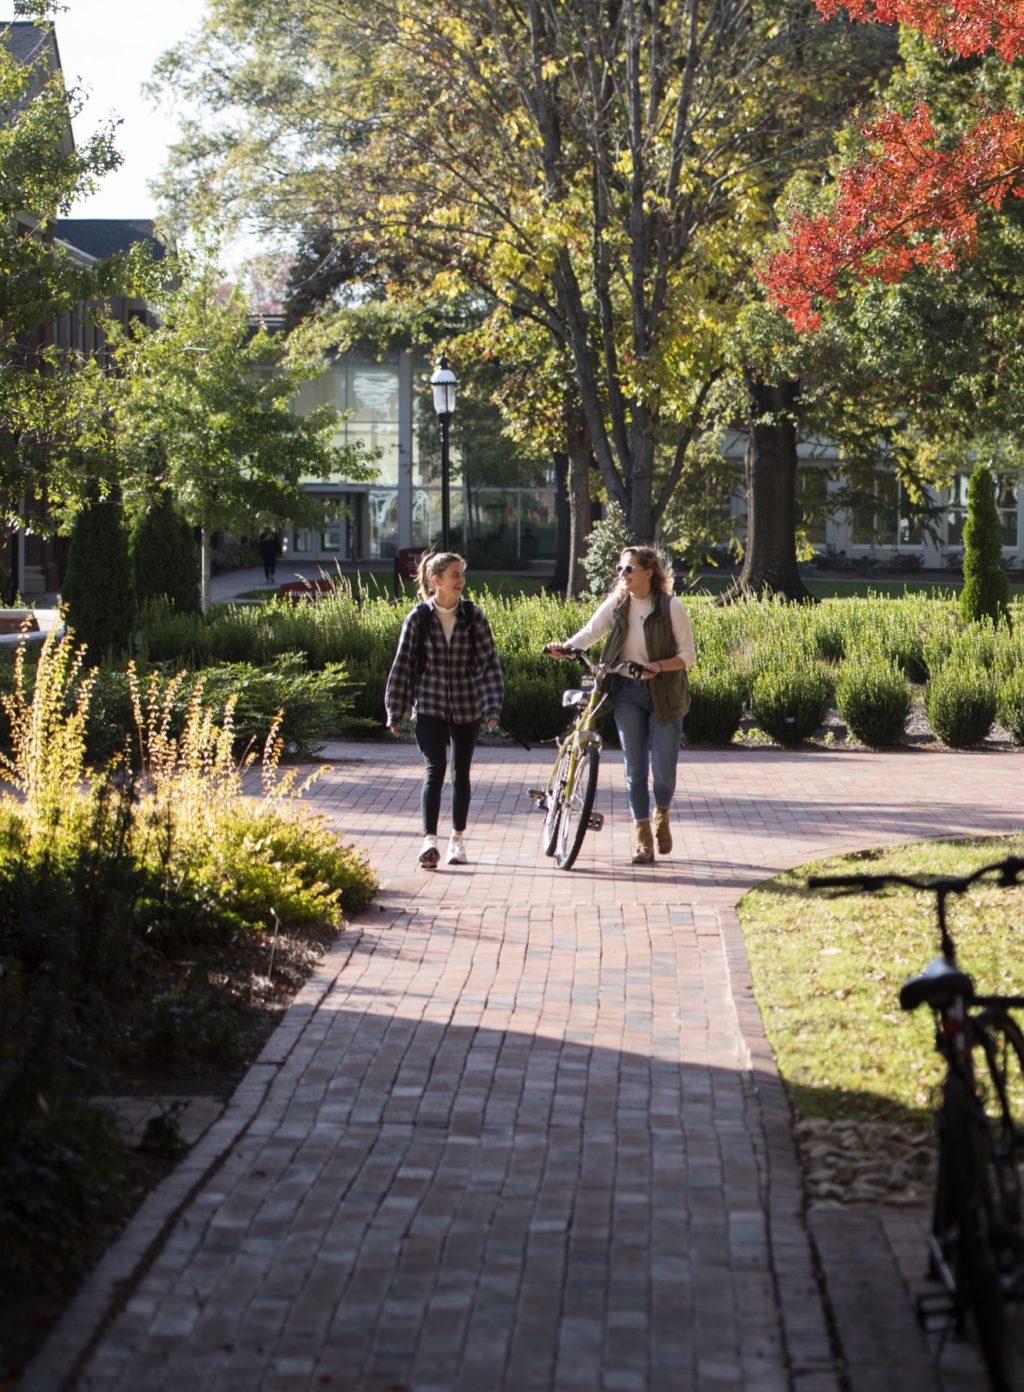 Two students (one pushing a bicycle) talk as they walk along a brick pathway